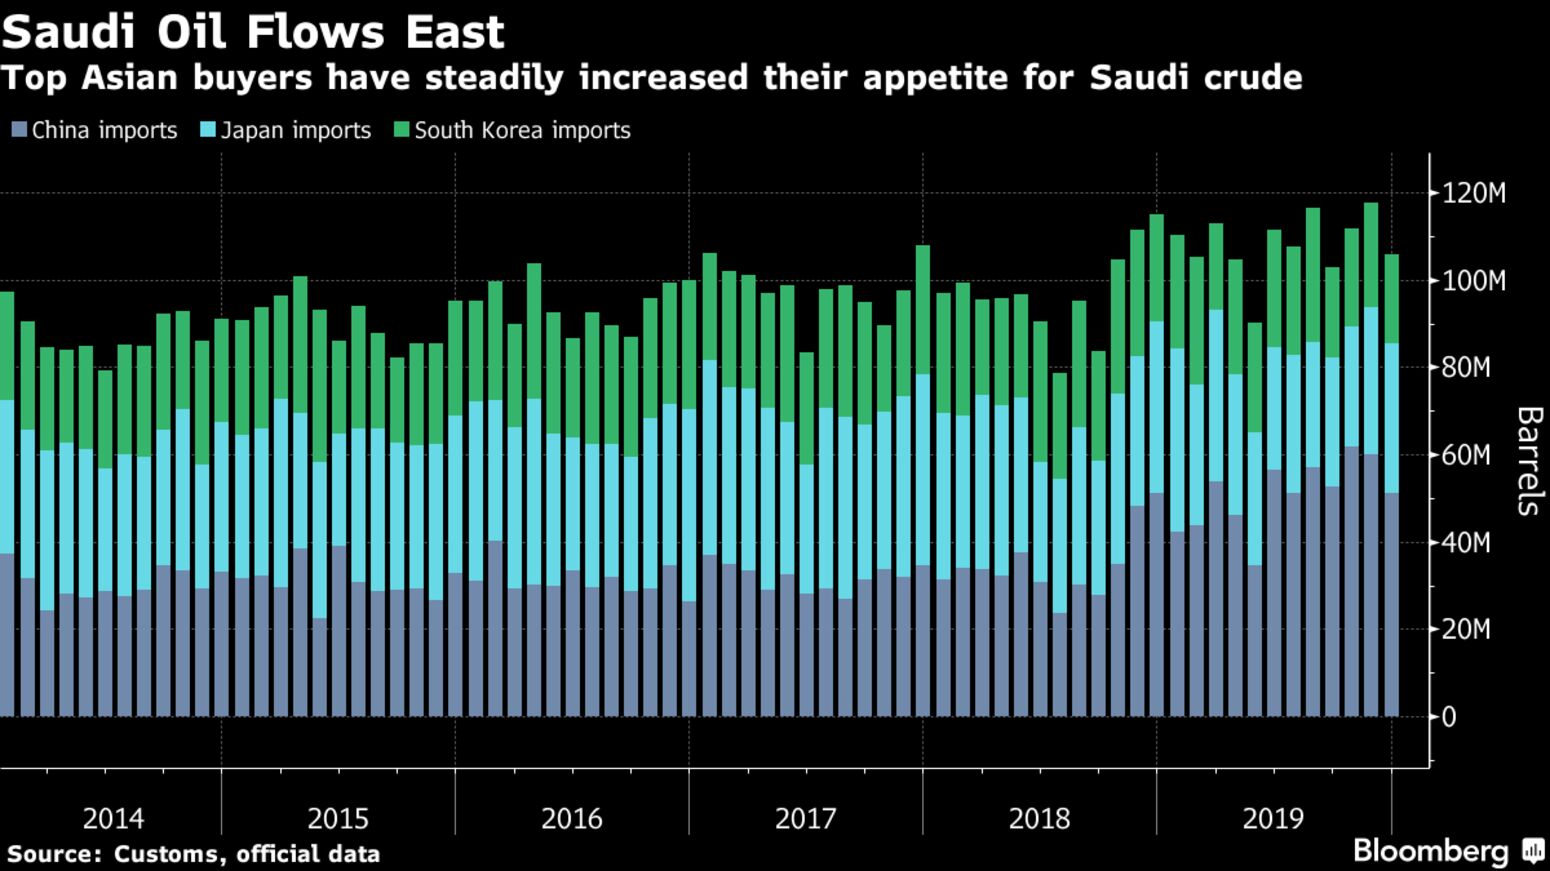 Top Asian buyers have steadily increased their appetite for Saudi crude